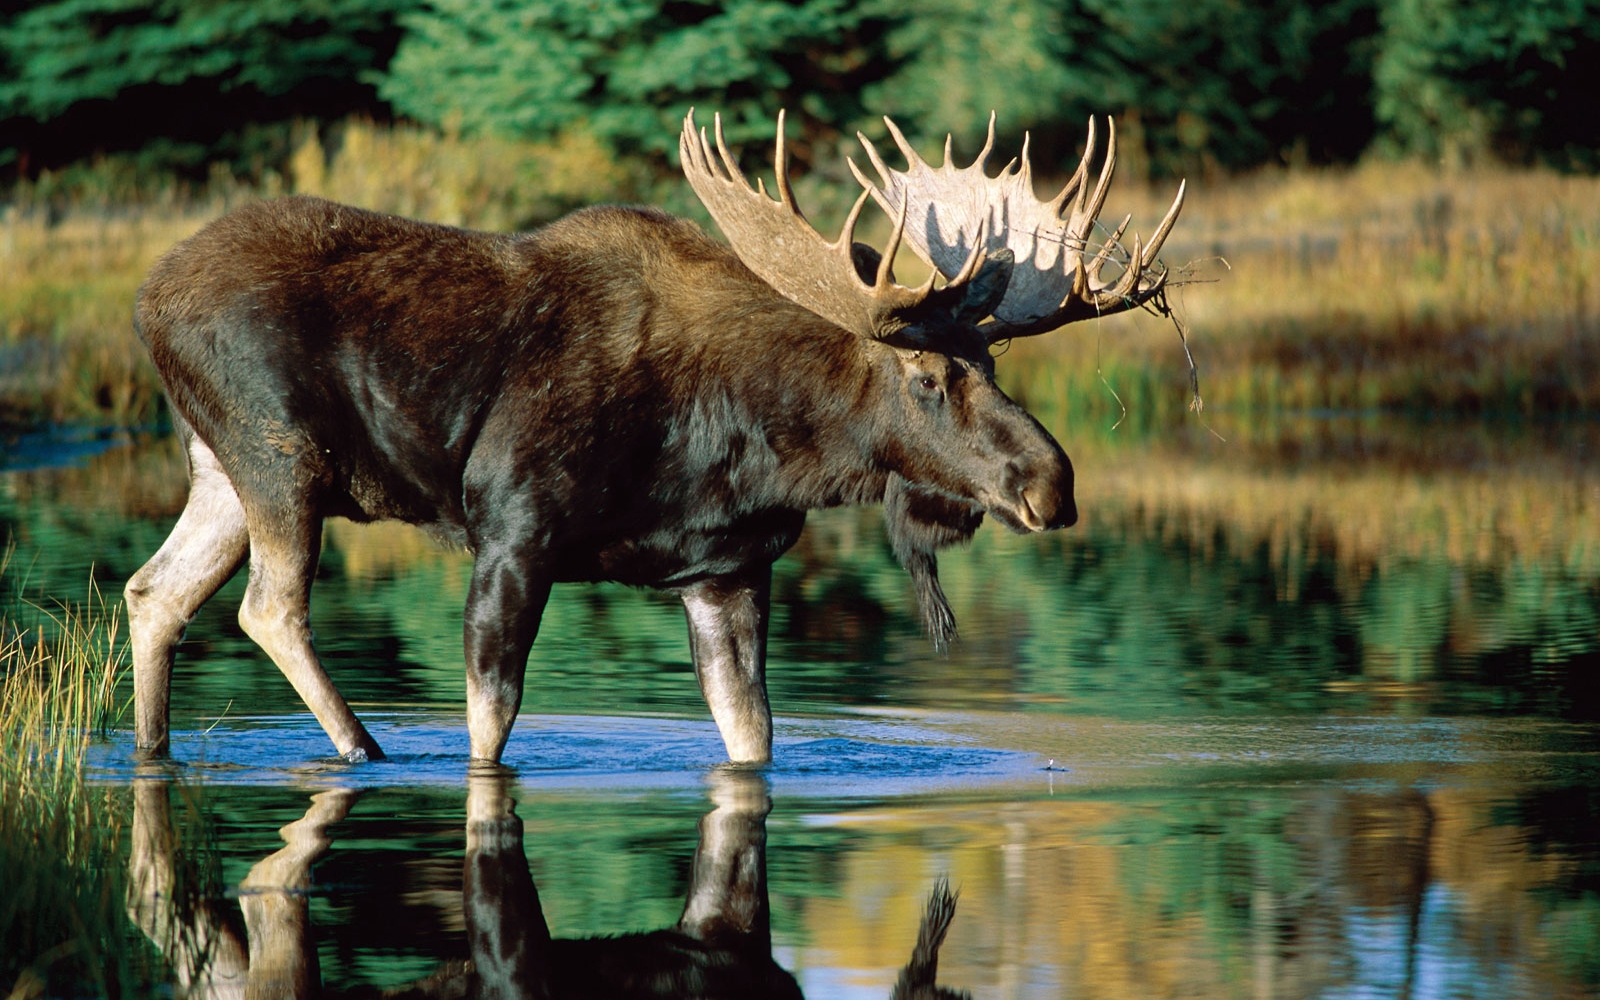 Popular Moose Image for Phone